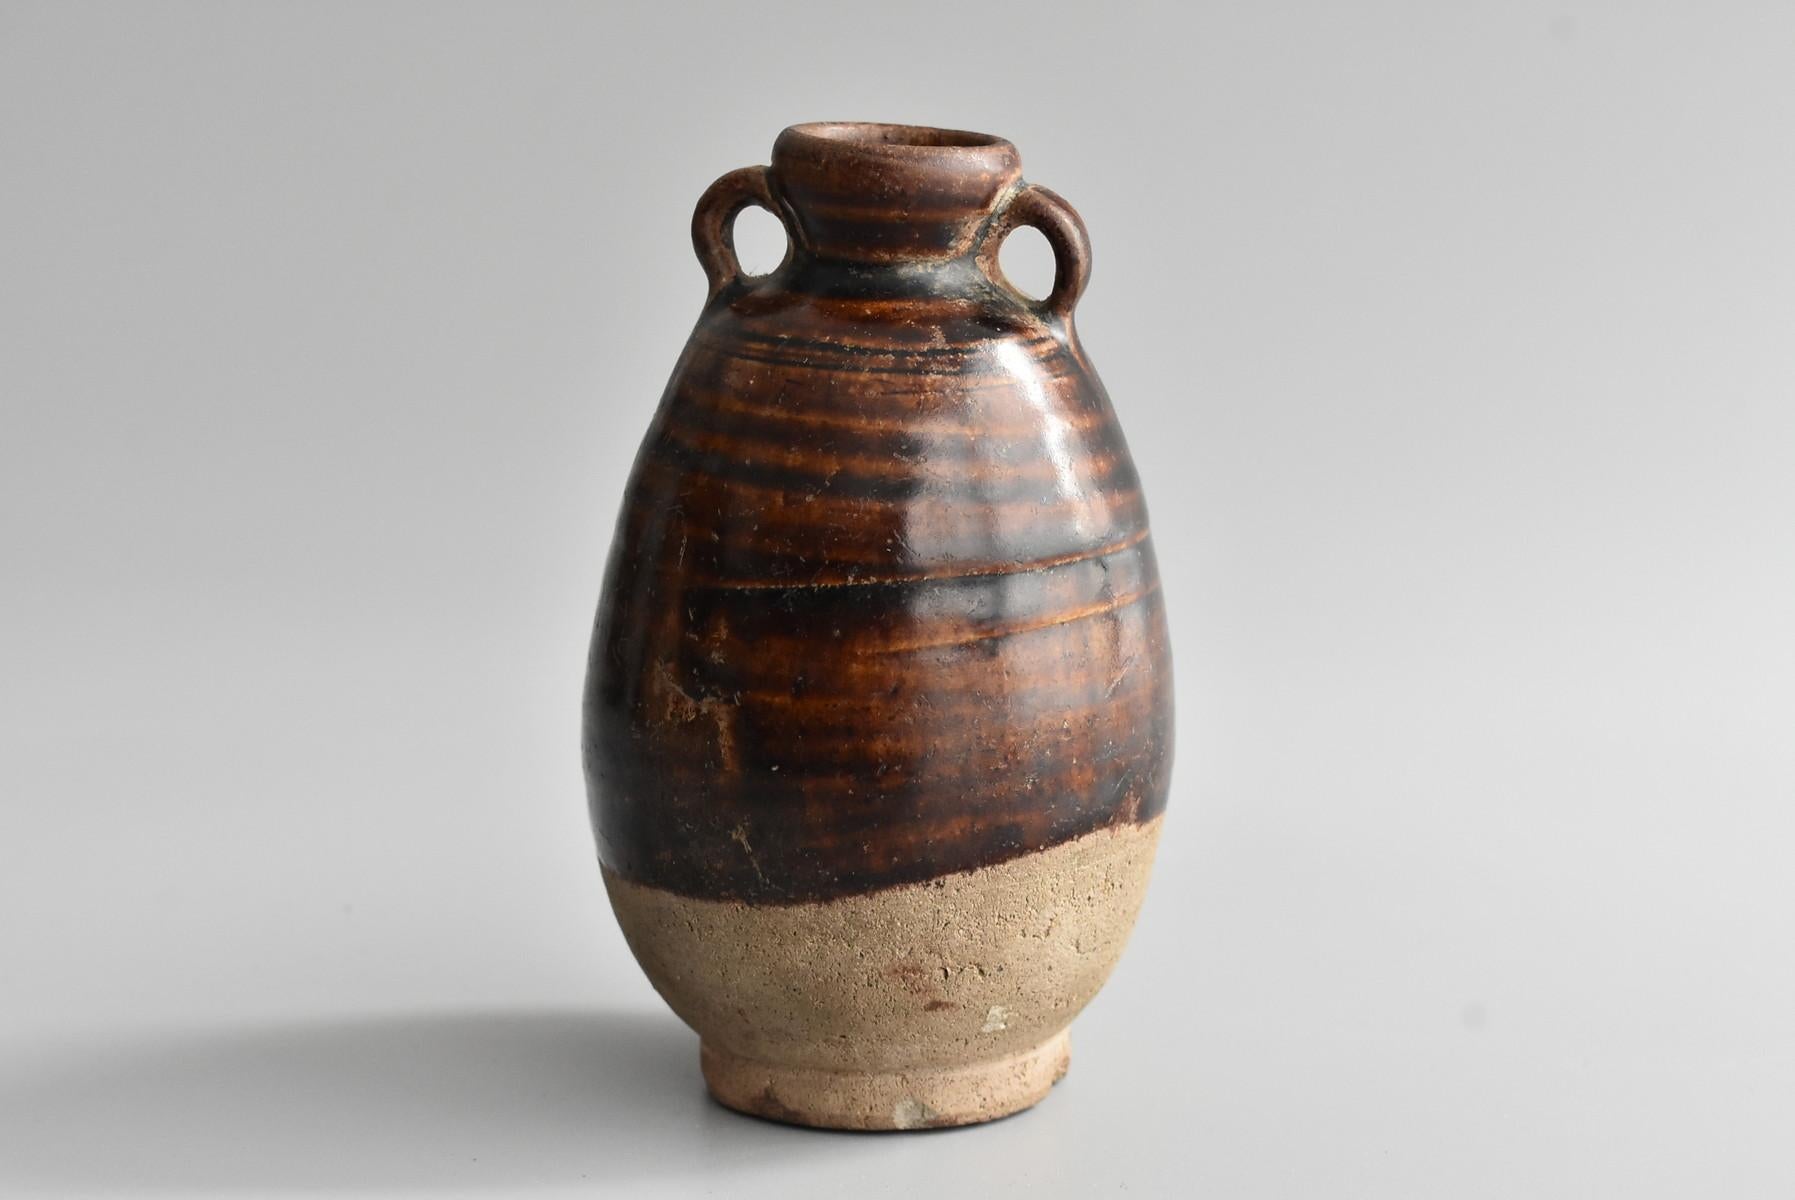 A bottle baked in Thailand around the 15th century.

Trade with Southeast Asia has been active in Japan for a long time. Many ceramics were imported from Thailand and Vietnam.
Also, in the 1900s, many ceramics were excavated in Thailand and